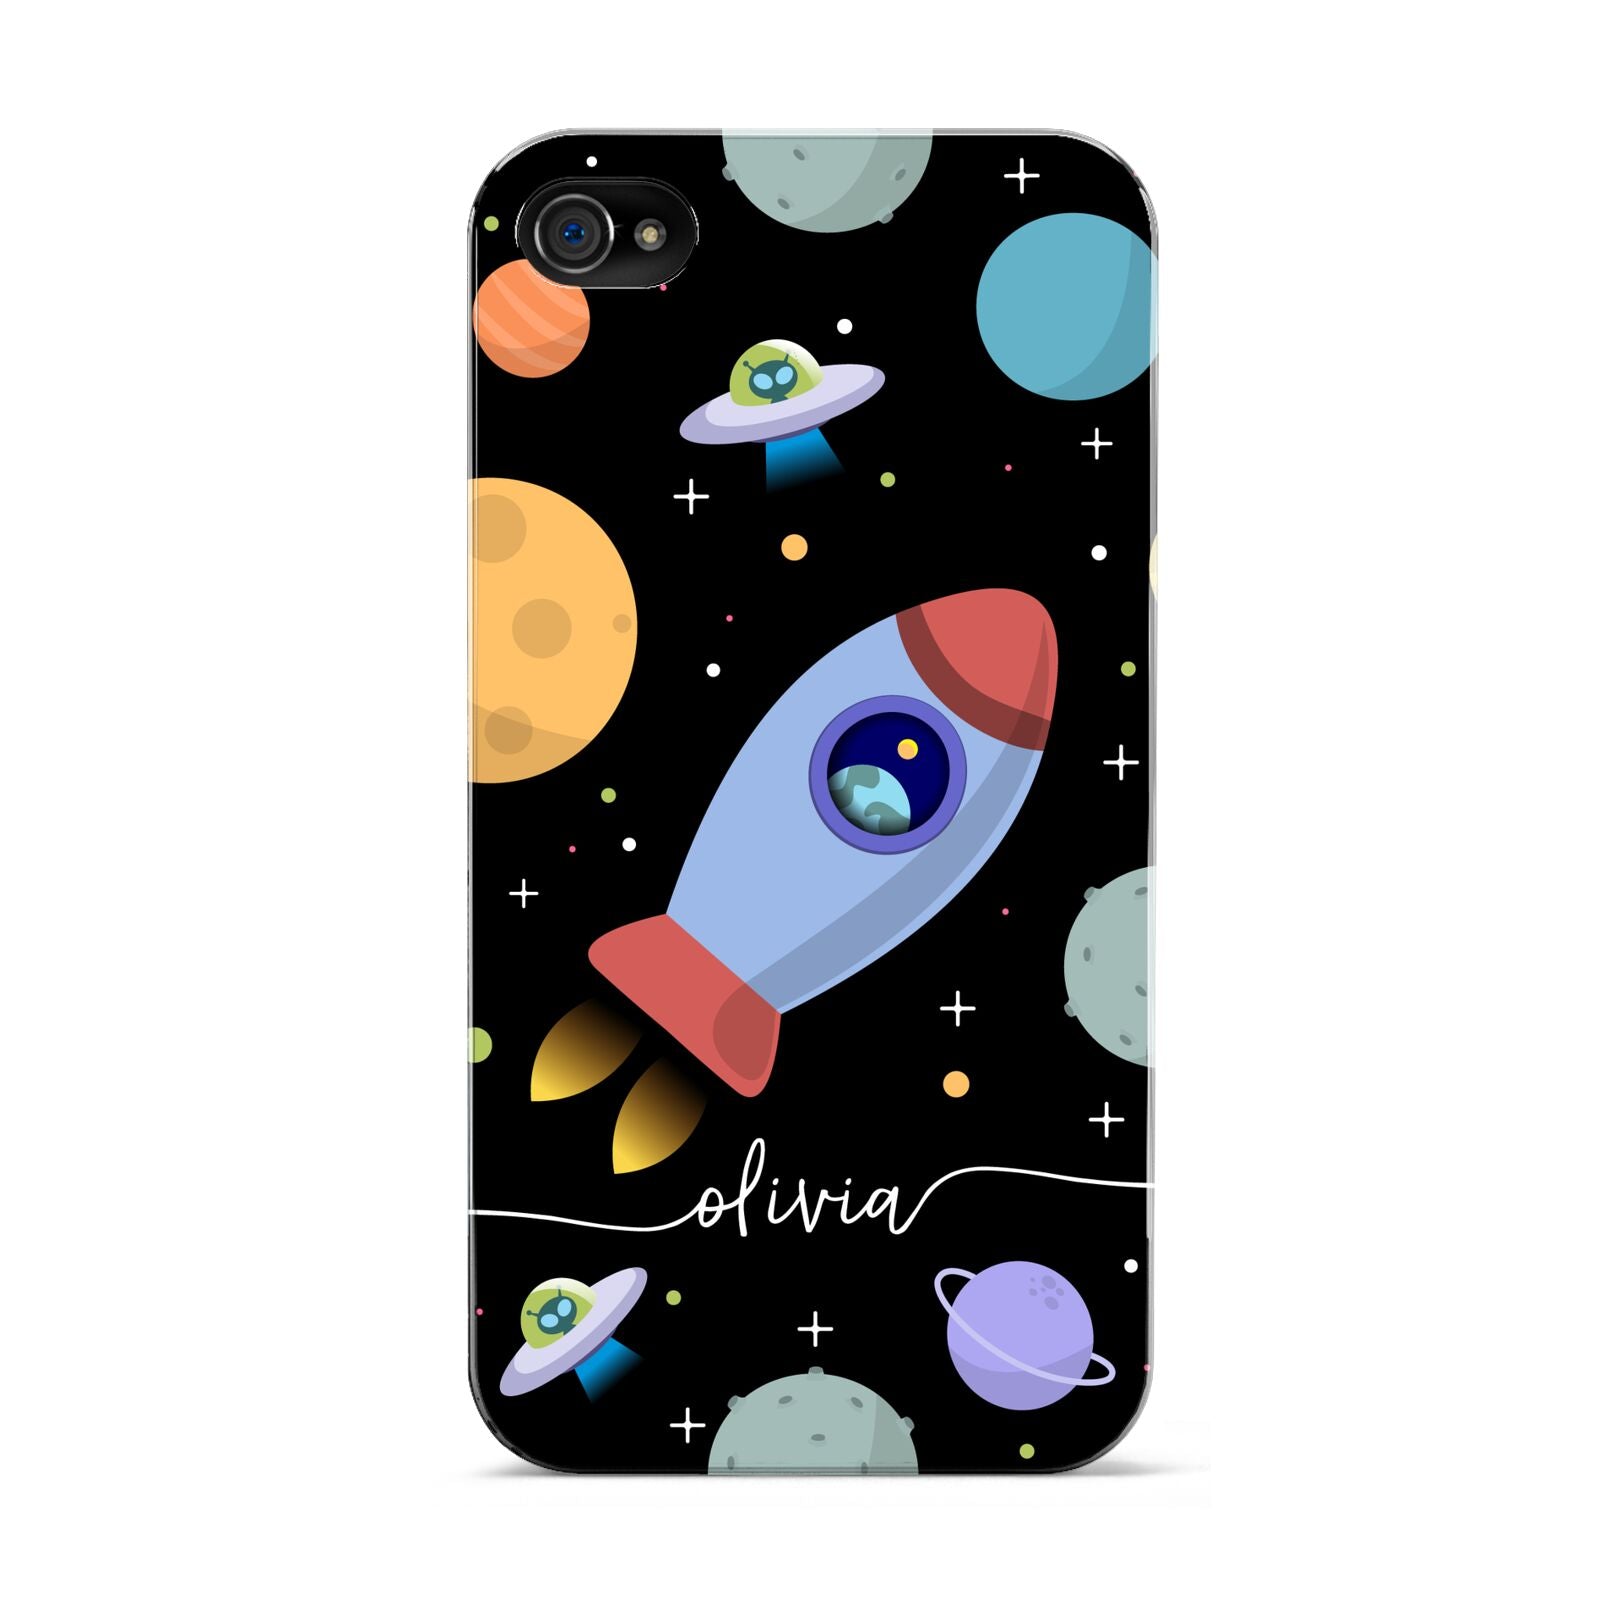 Fun Space Scene Artwork with Name Apple iPhone 4s Case